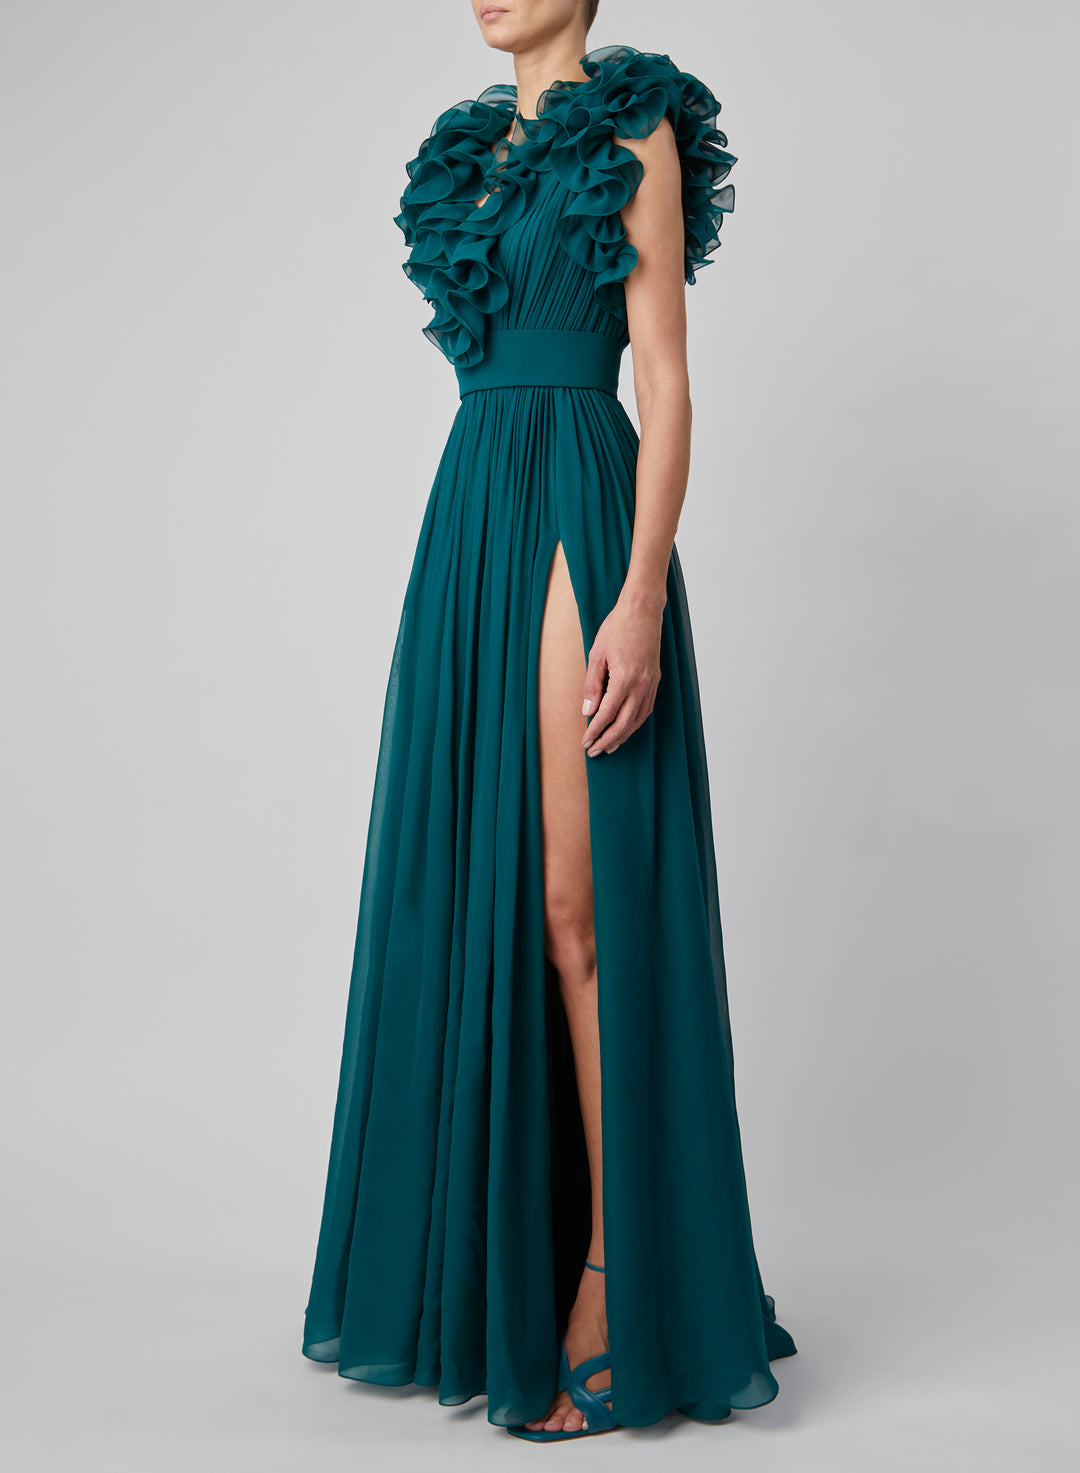 Designer Ready-to-Wear Dresses for Women - ELIE SAAB – Page 2